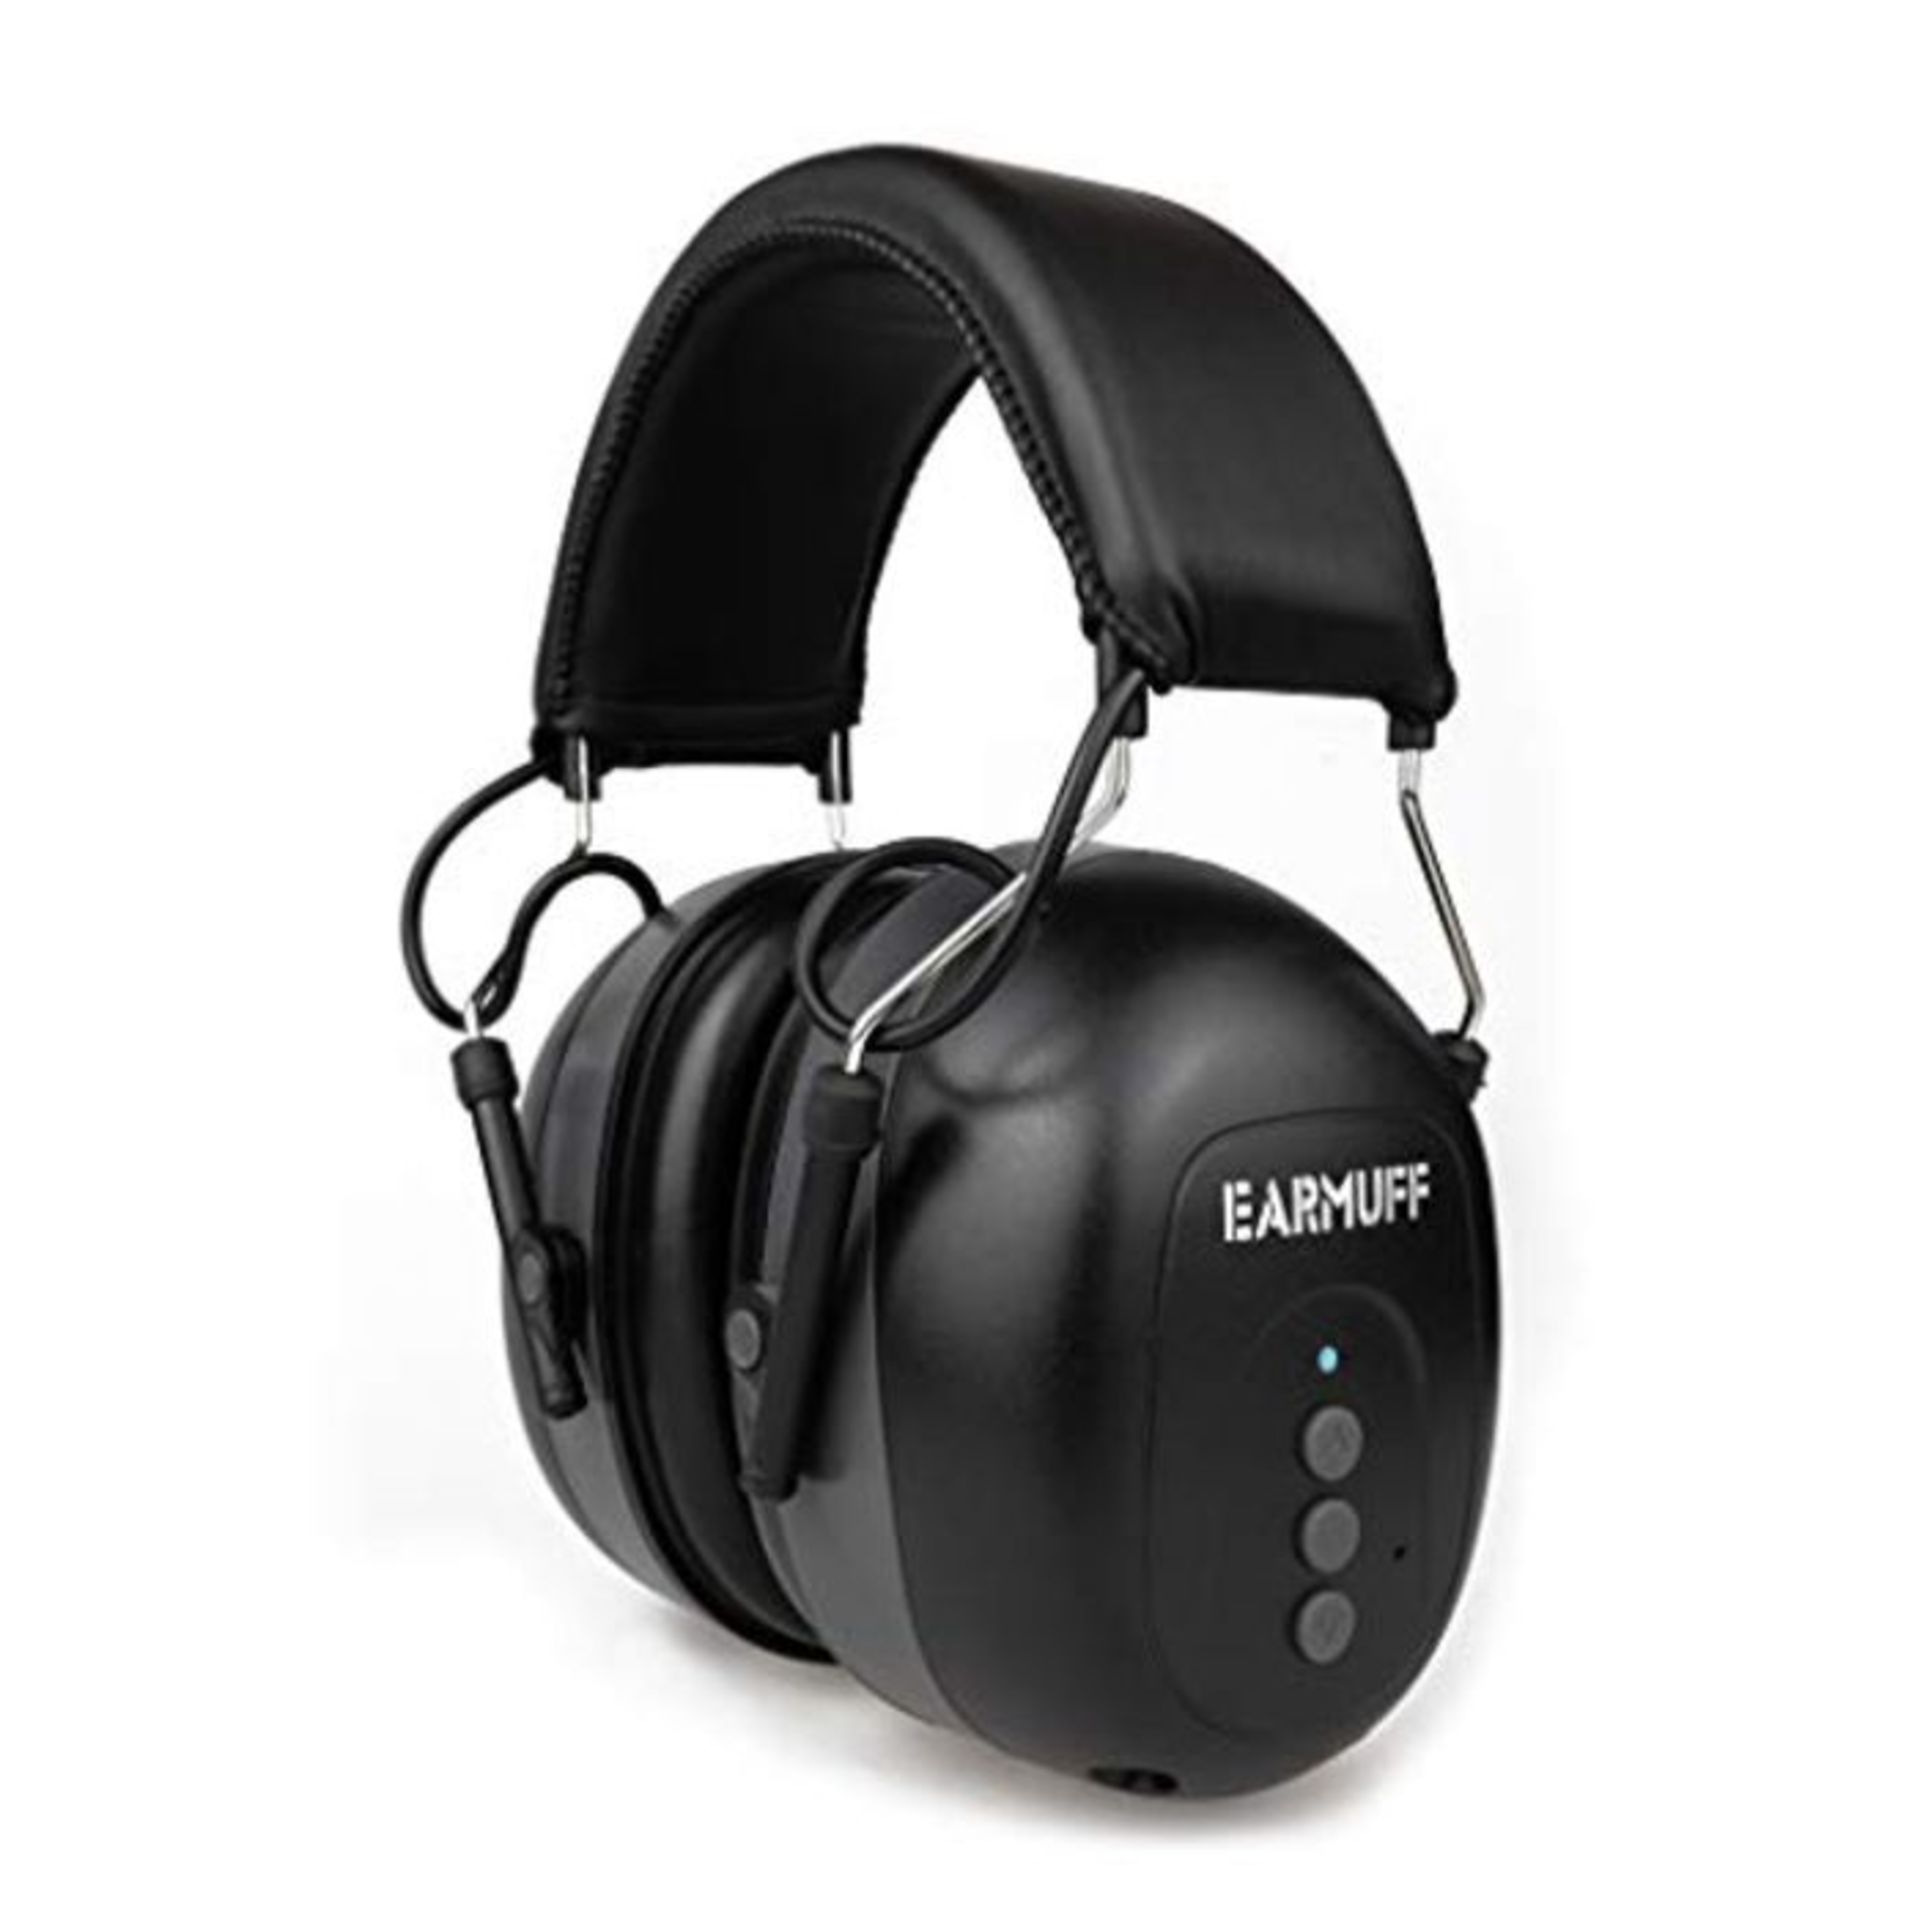 RRP £76.00 EARMUFF hearing protection with Bluetooth & AUX 31dB insulation | Listen to music & ot